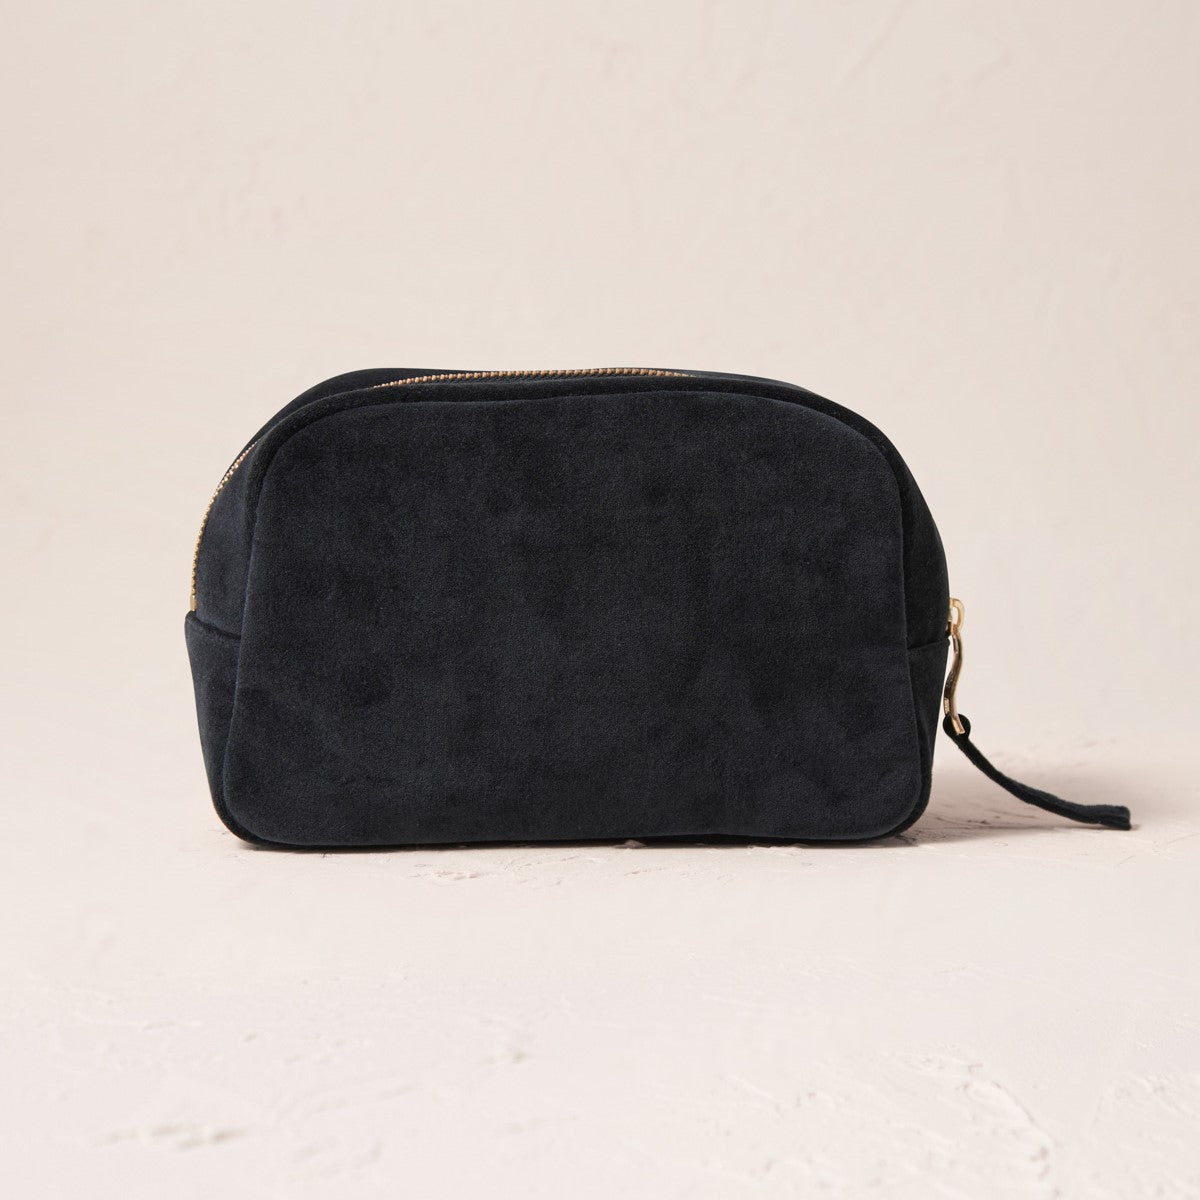 Embroidered Cosmetics Bag - Turtle Conservation Charcoal Velvet